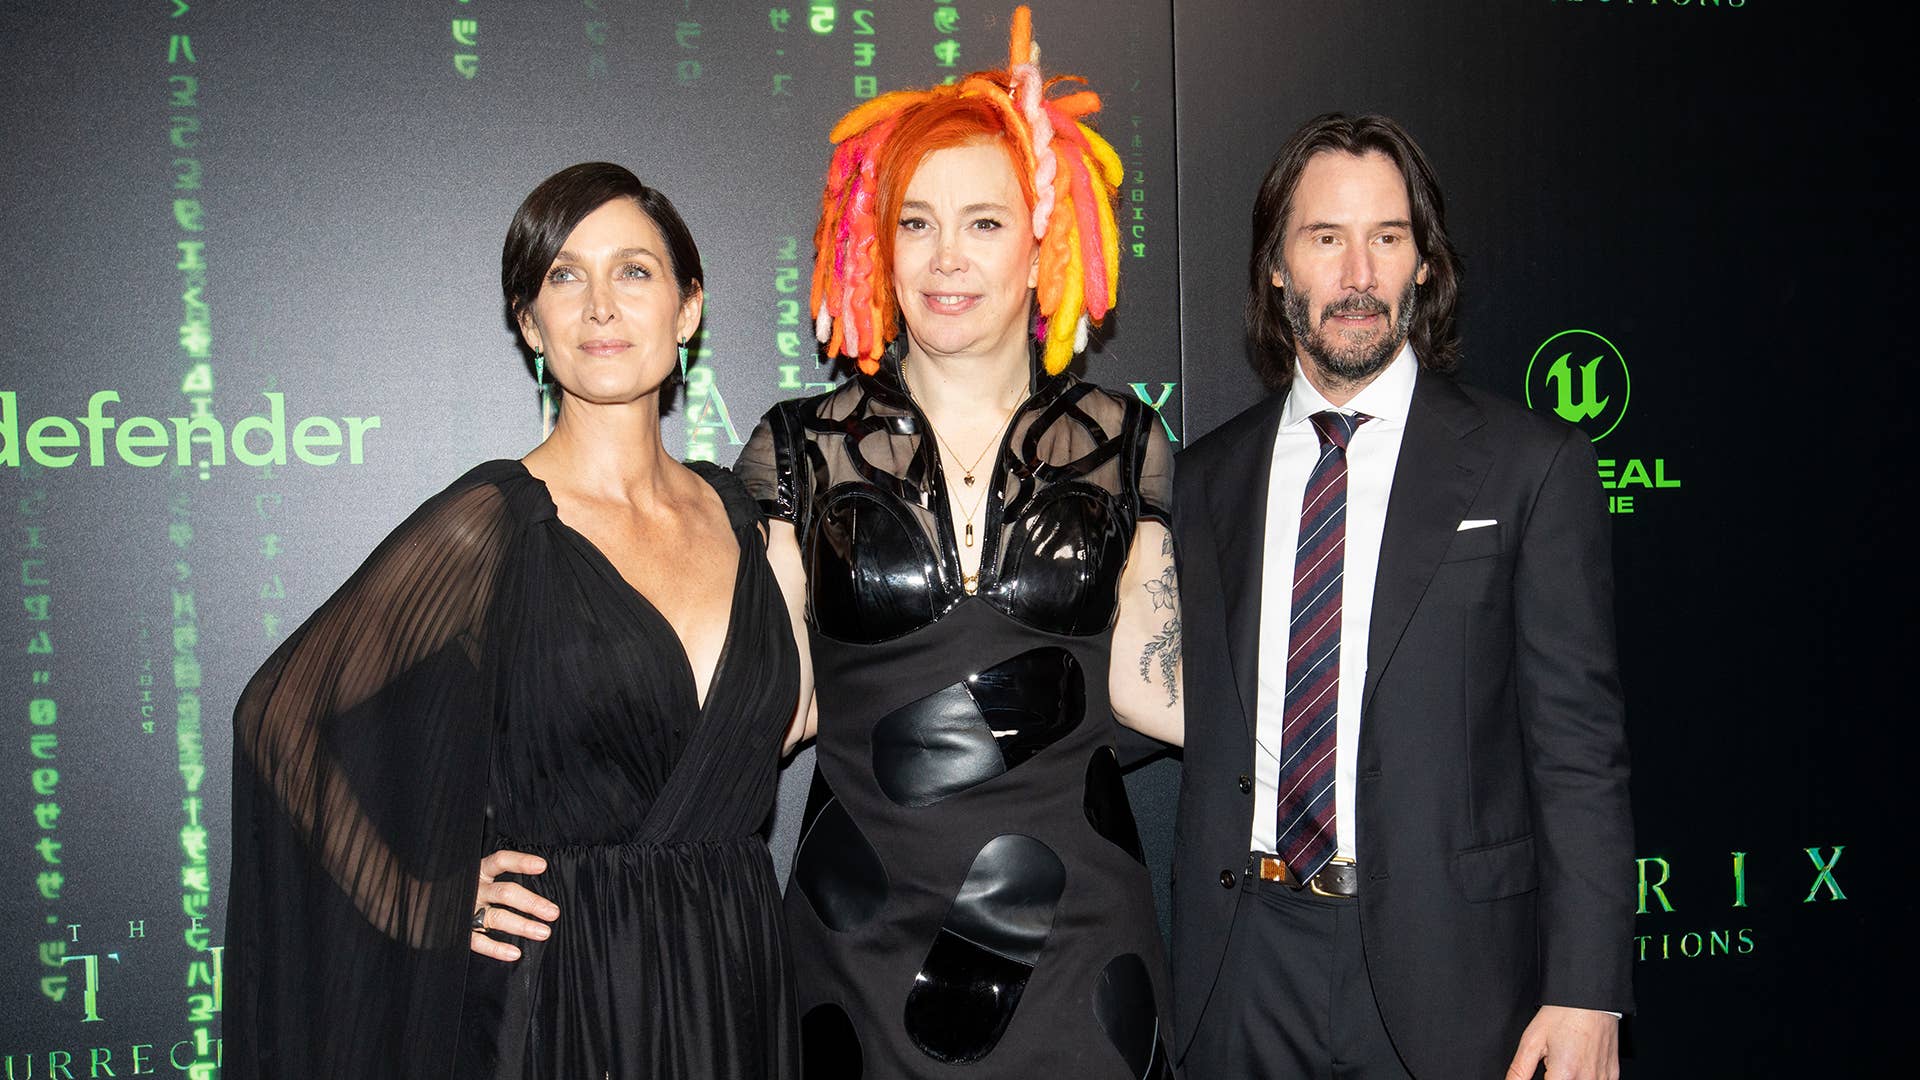 Carrie Anne Moss, Lana Wachowski, and Keanu Reeves at the U.S. premiere of 'The Matrix Resurrections.'